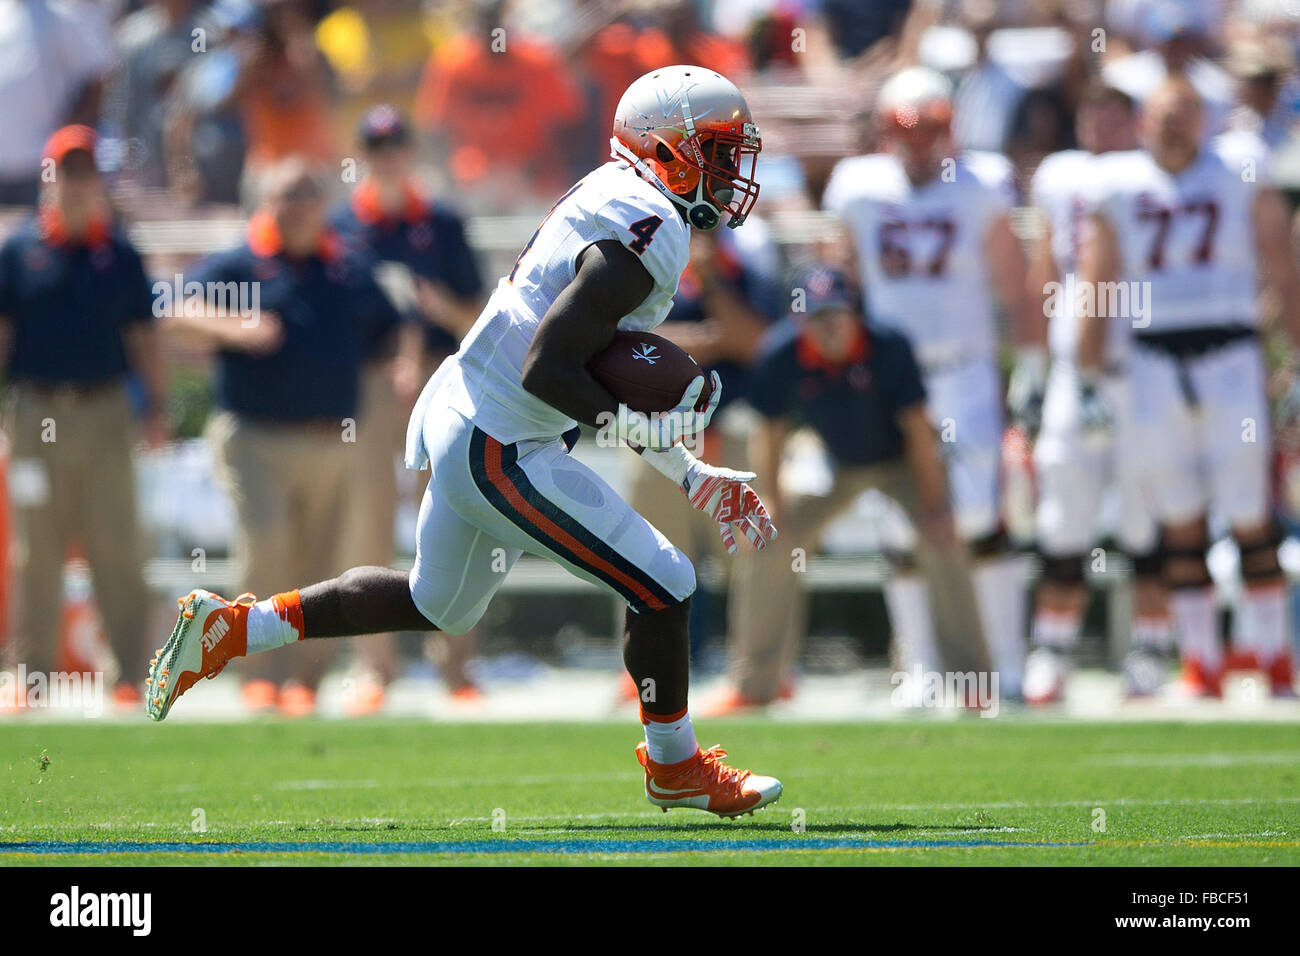 Running back Taquan Mizzell #4 of the Virginia Cavaliers rushes up field against the UCLA Bruins during the first quarter at Stock Photo